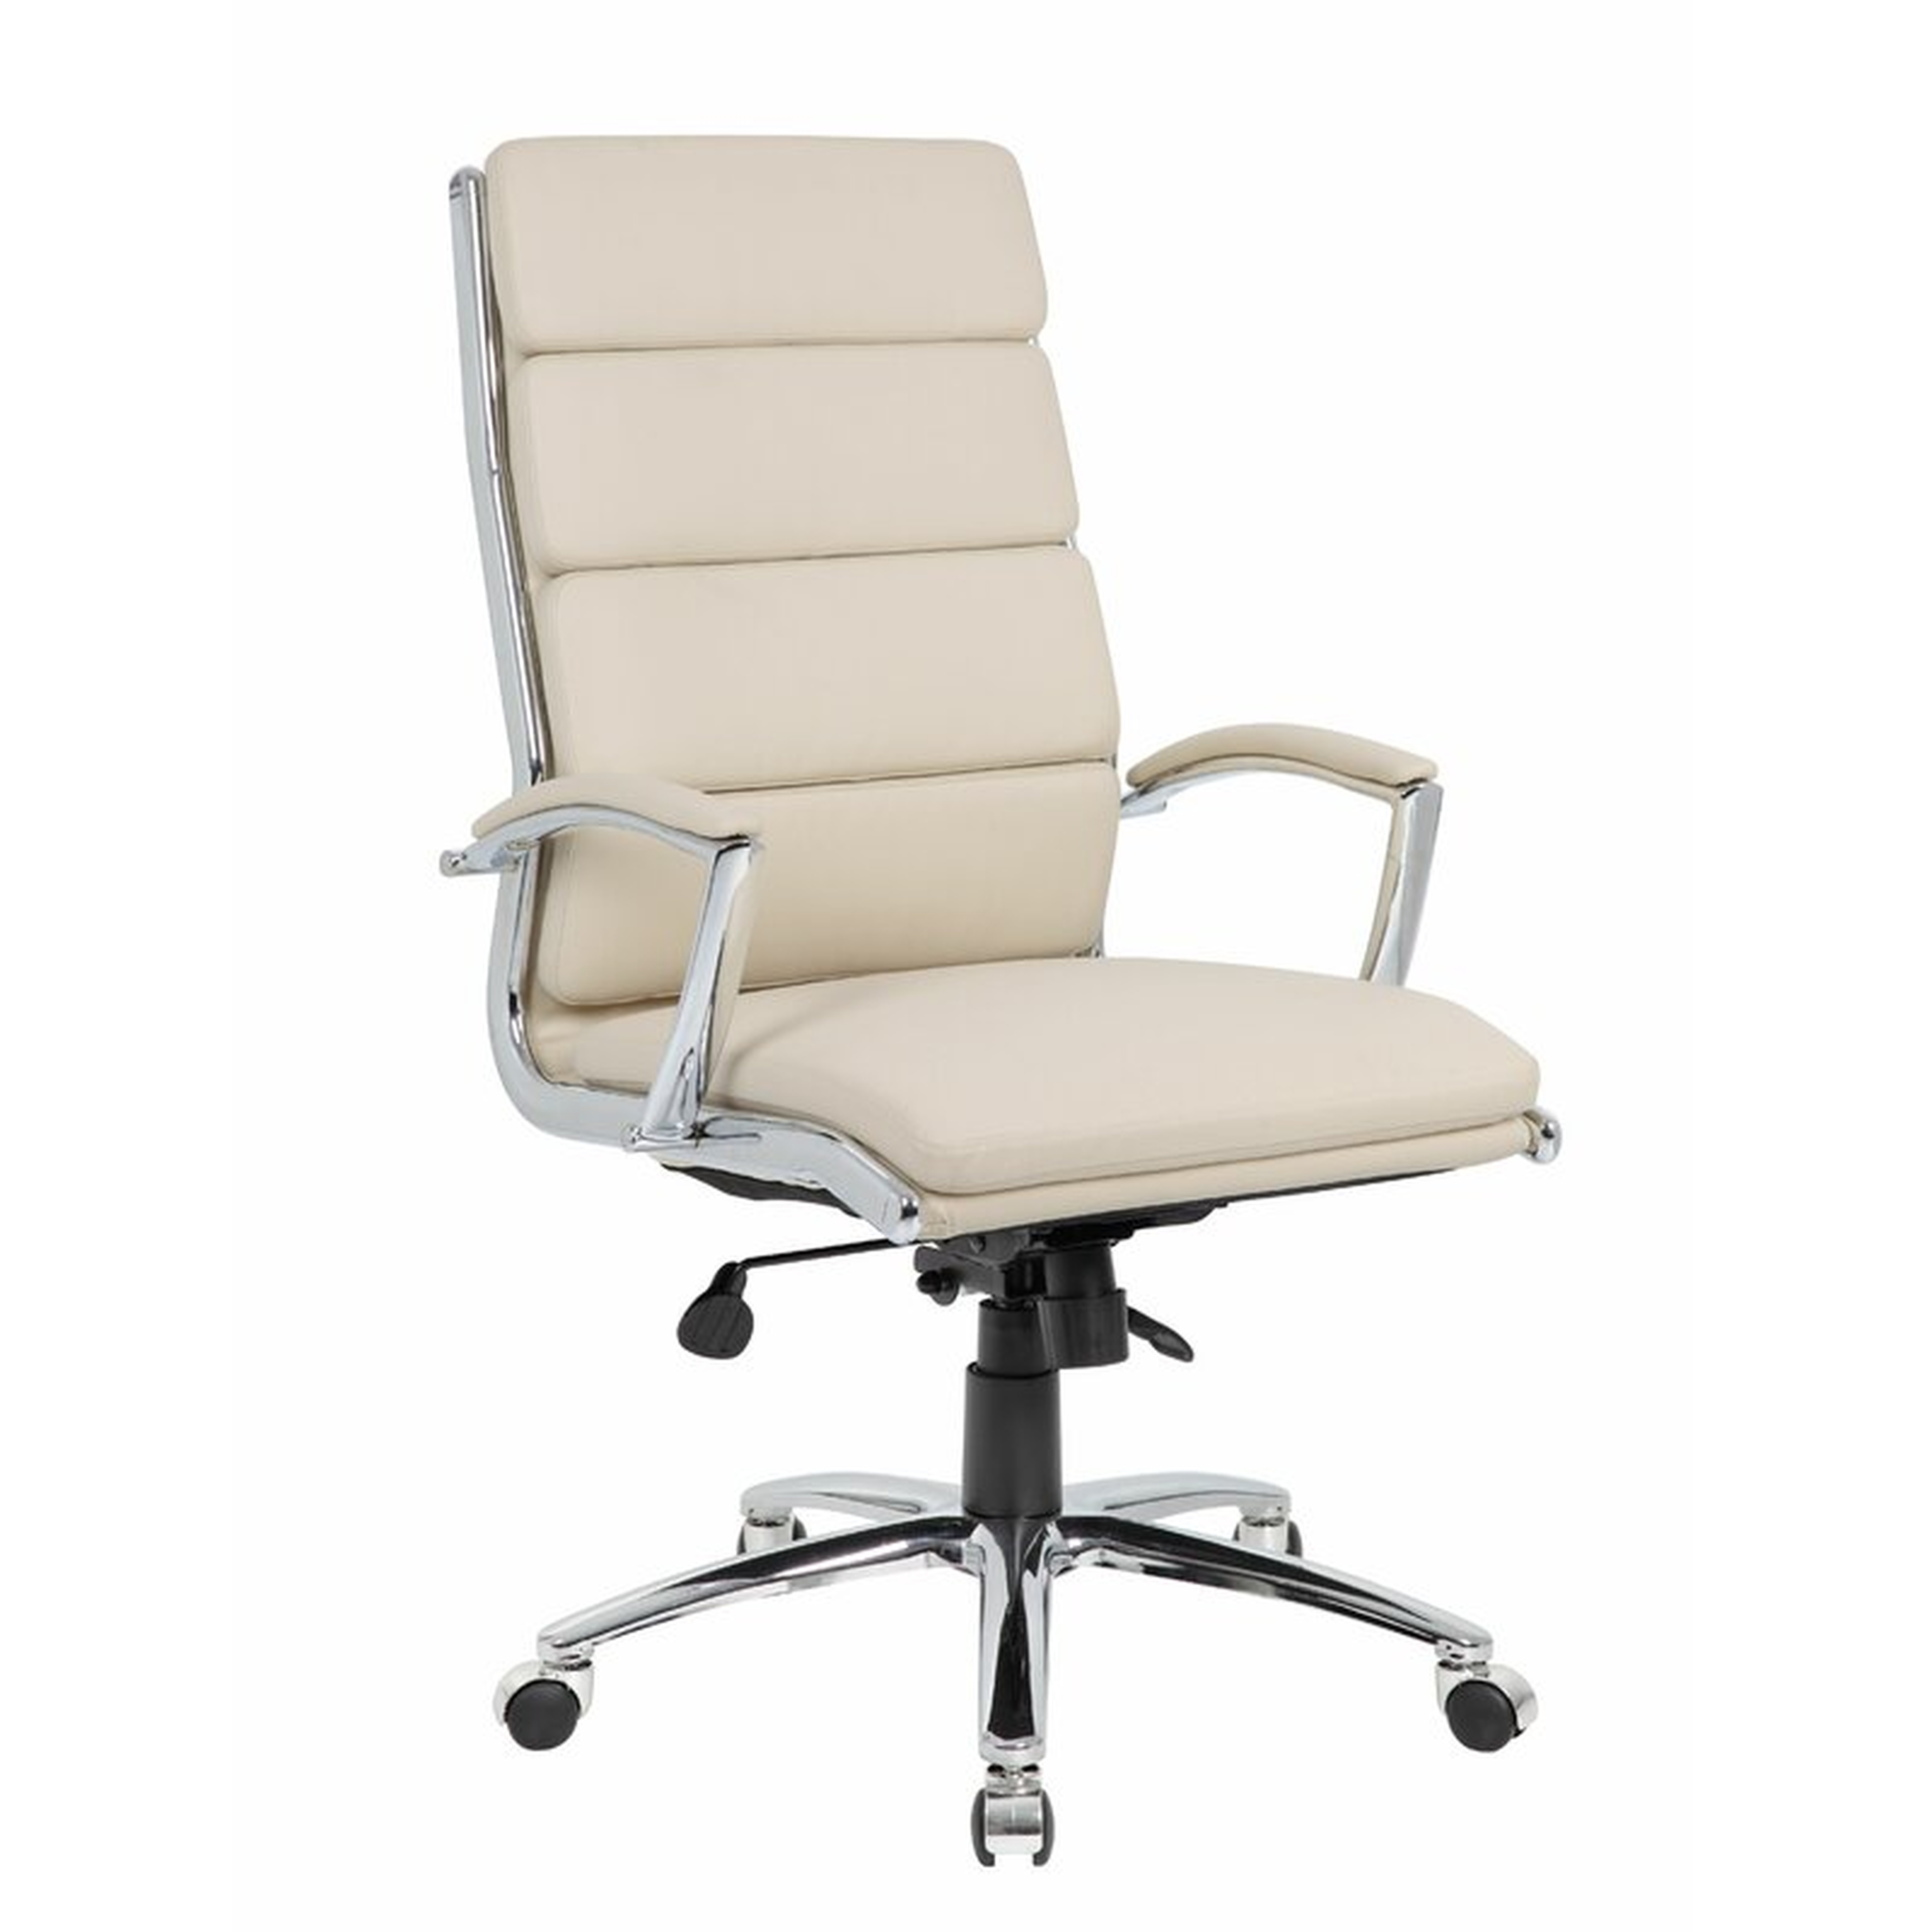 Sewell Caressoft Plus Conference Chair - AllModern